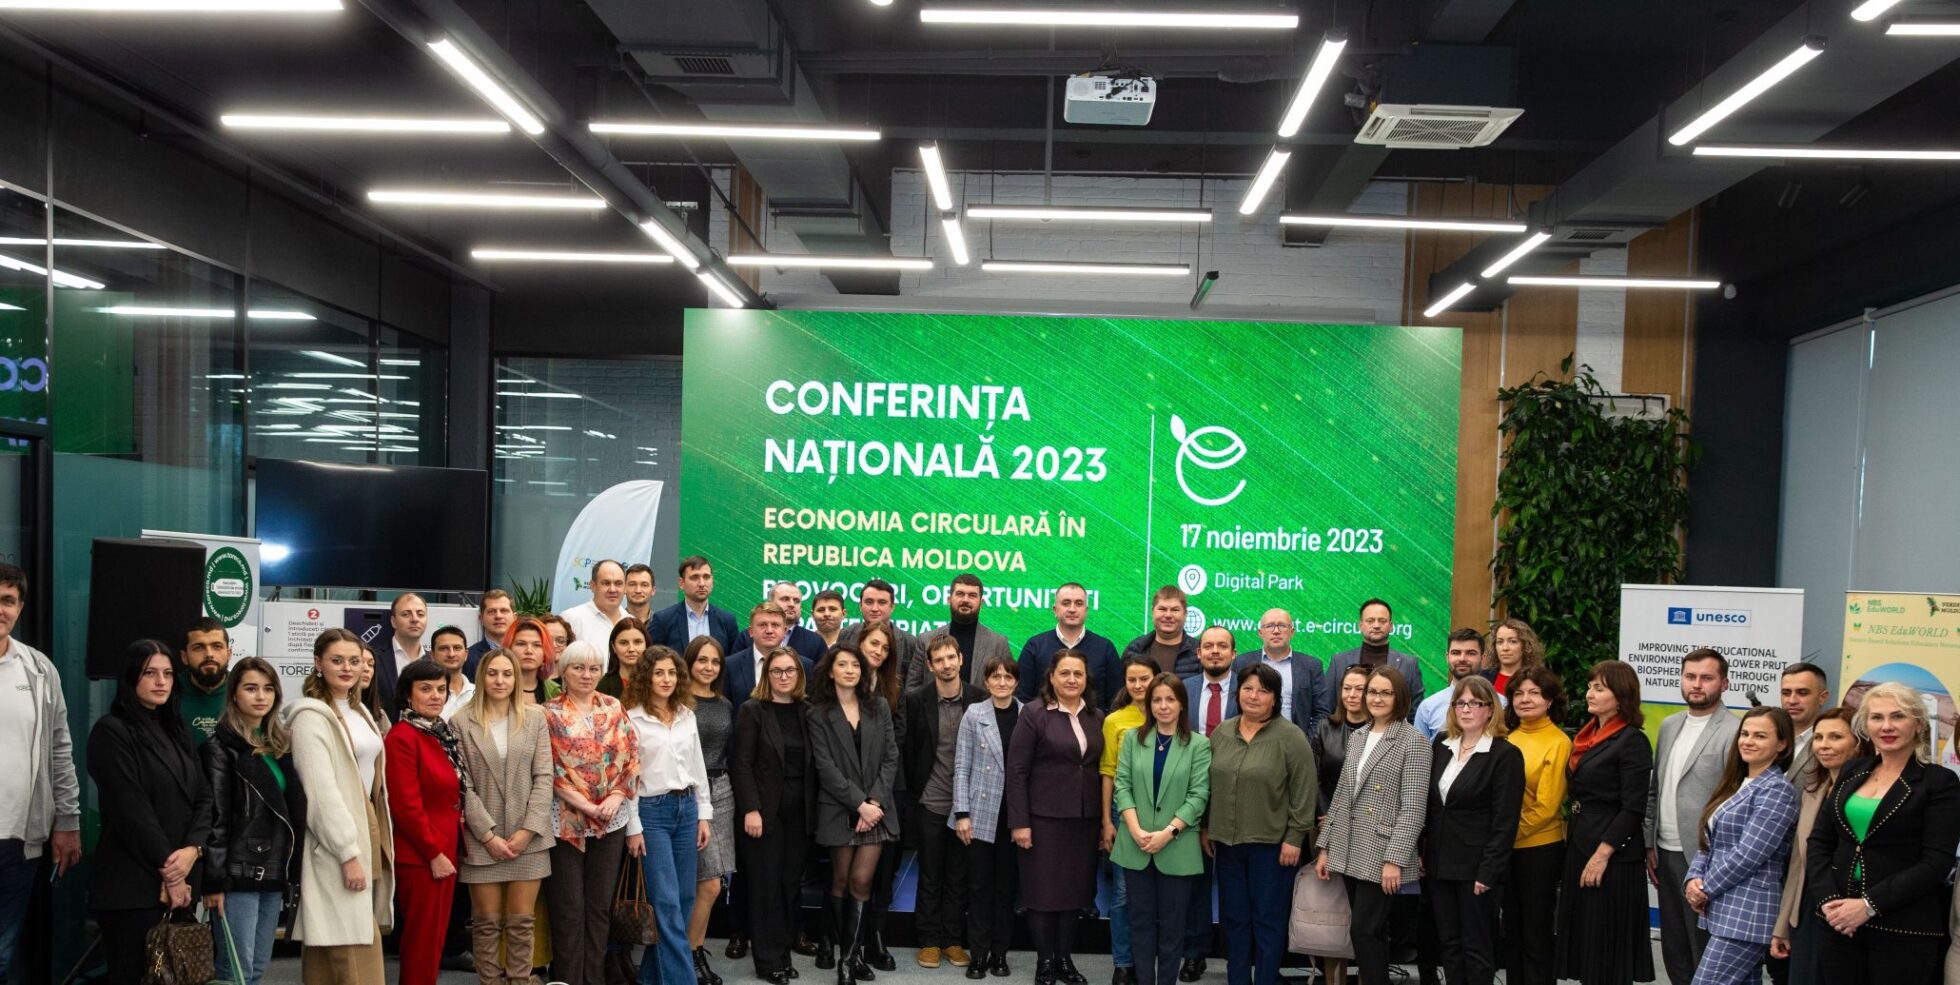 National conference 2023 – circular economy in the Republic of Moldova